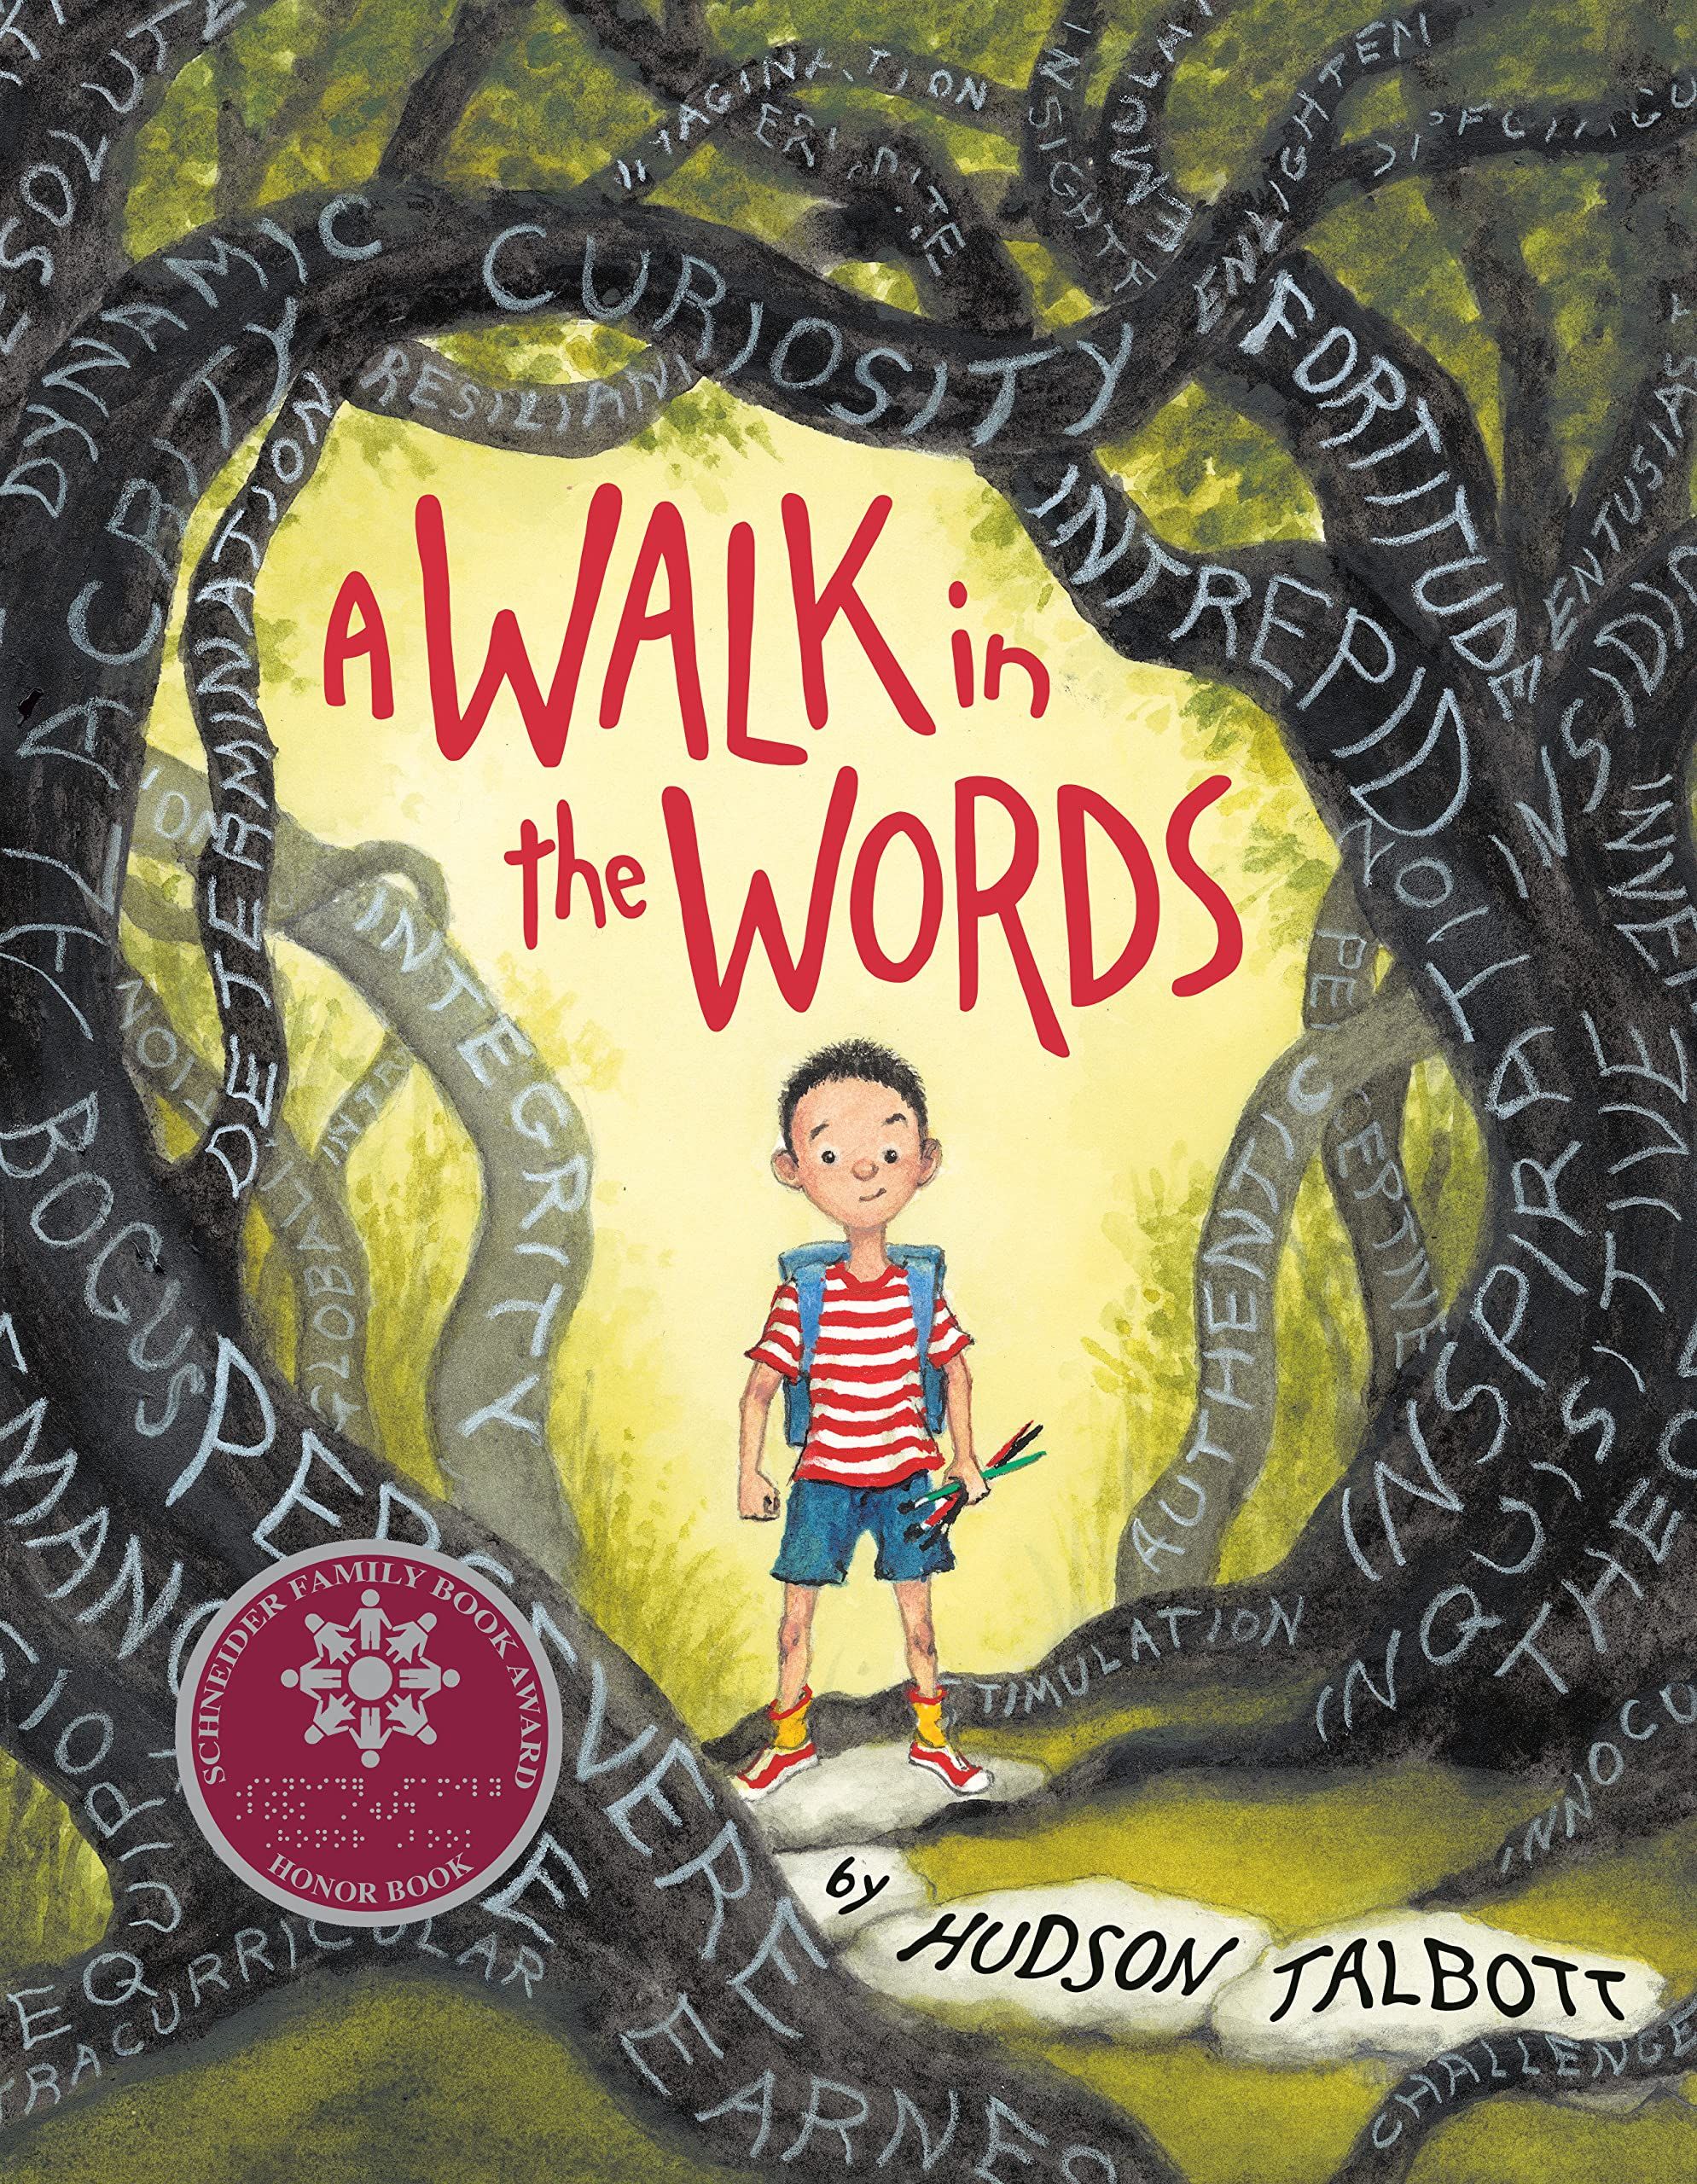 a walk in the words by hudson talbott book cover